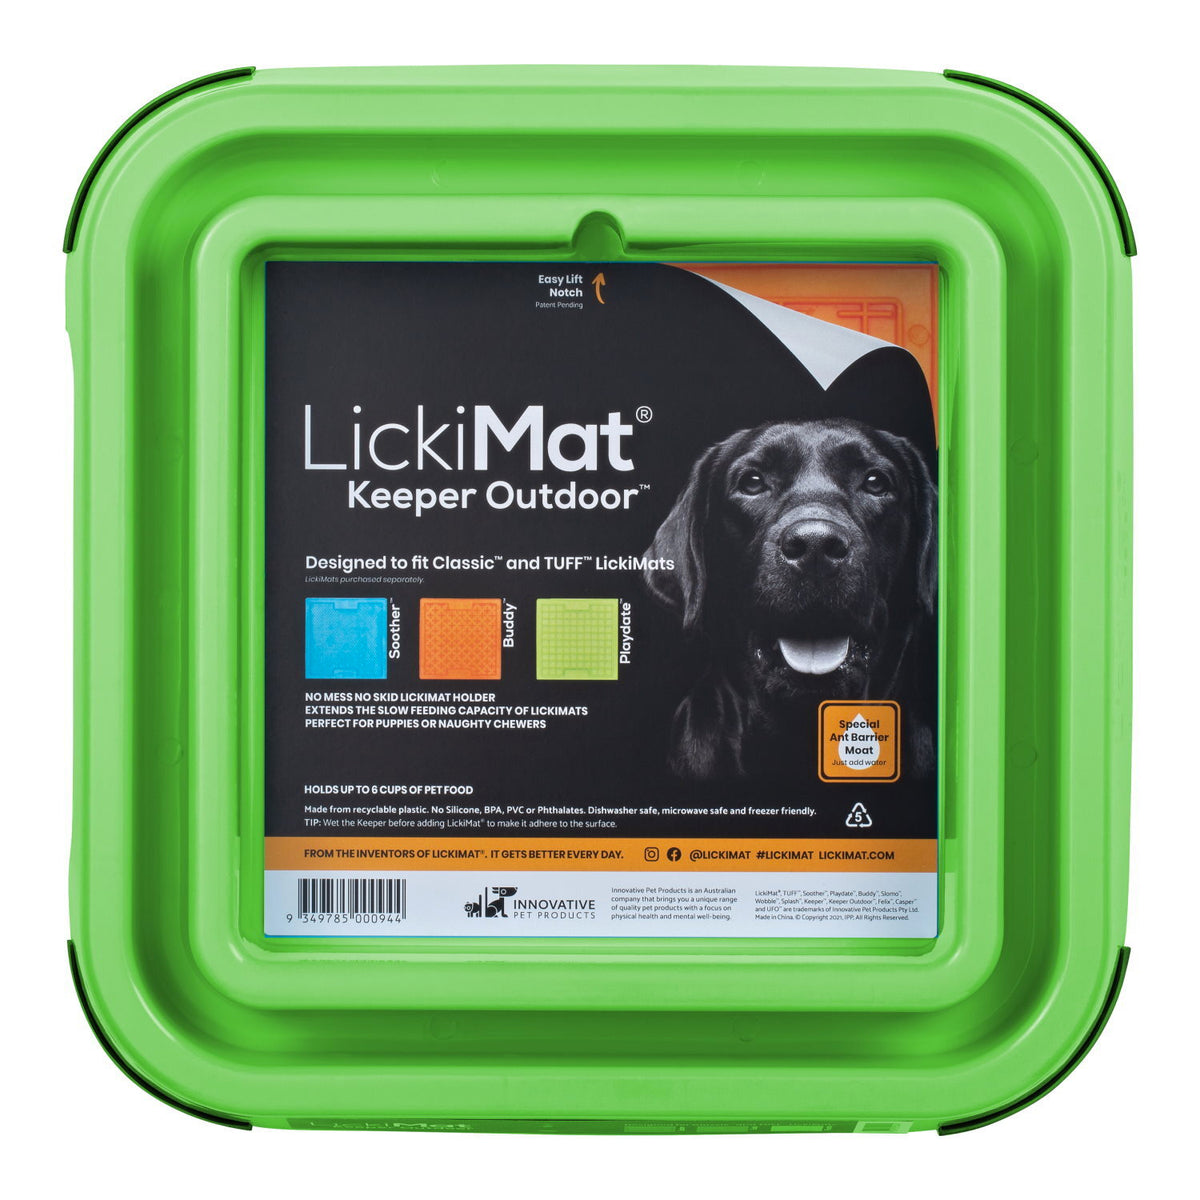 Outdoor Keeper Ant Proof LickiMat Pad Holder for Standard Size LickiMat